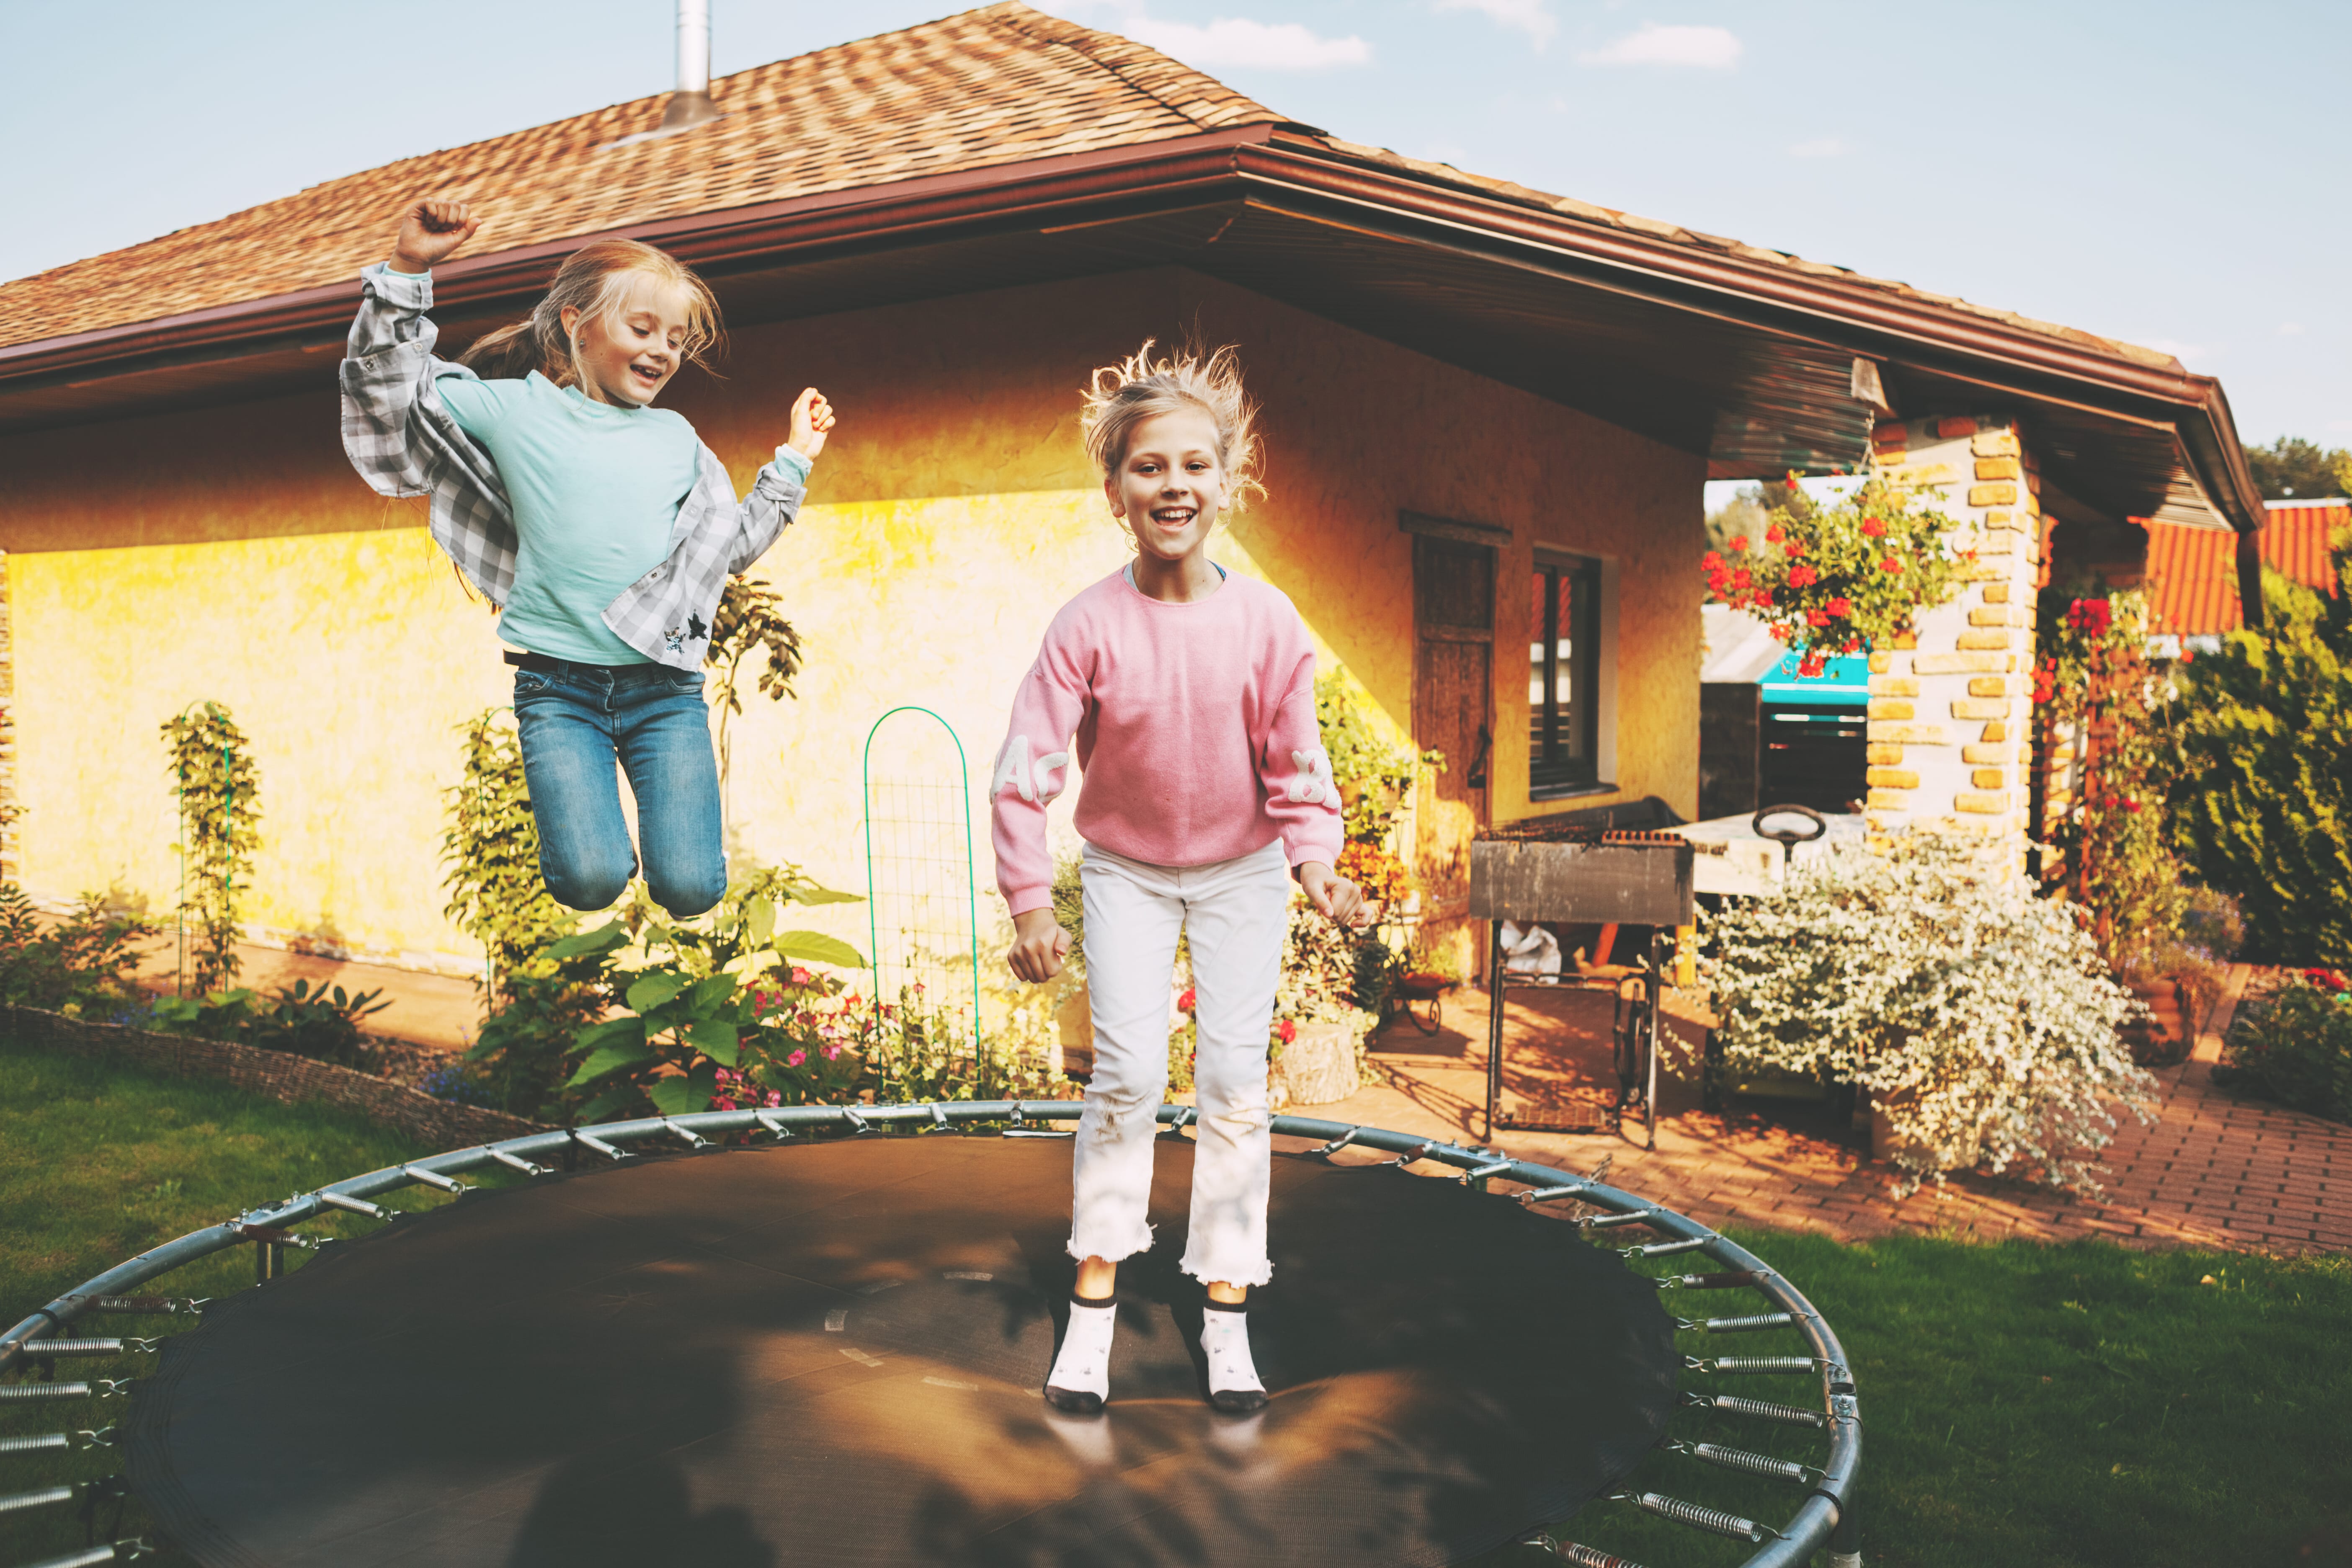 two young girls jumping on a trampoline in front of a one-story home